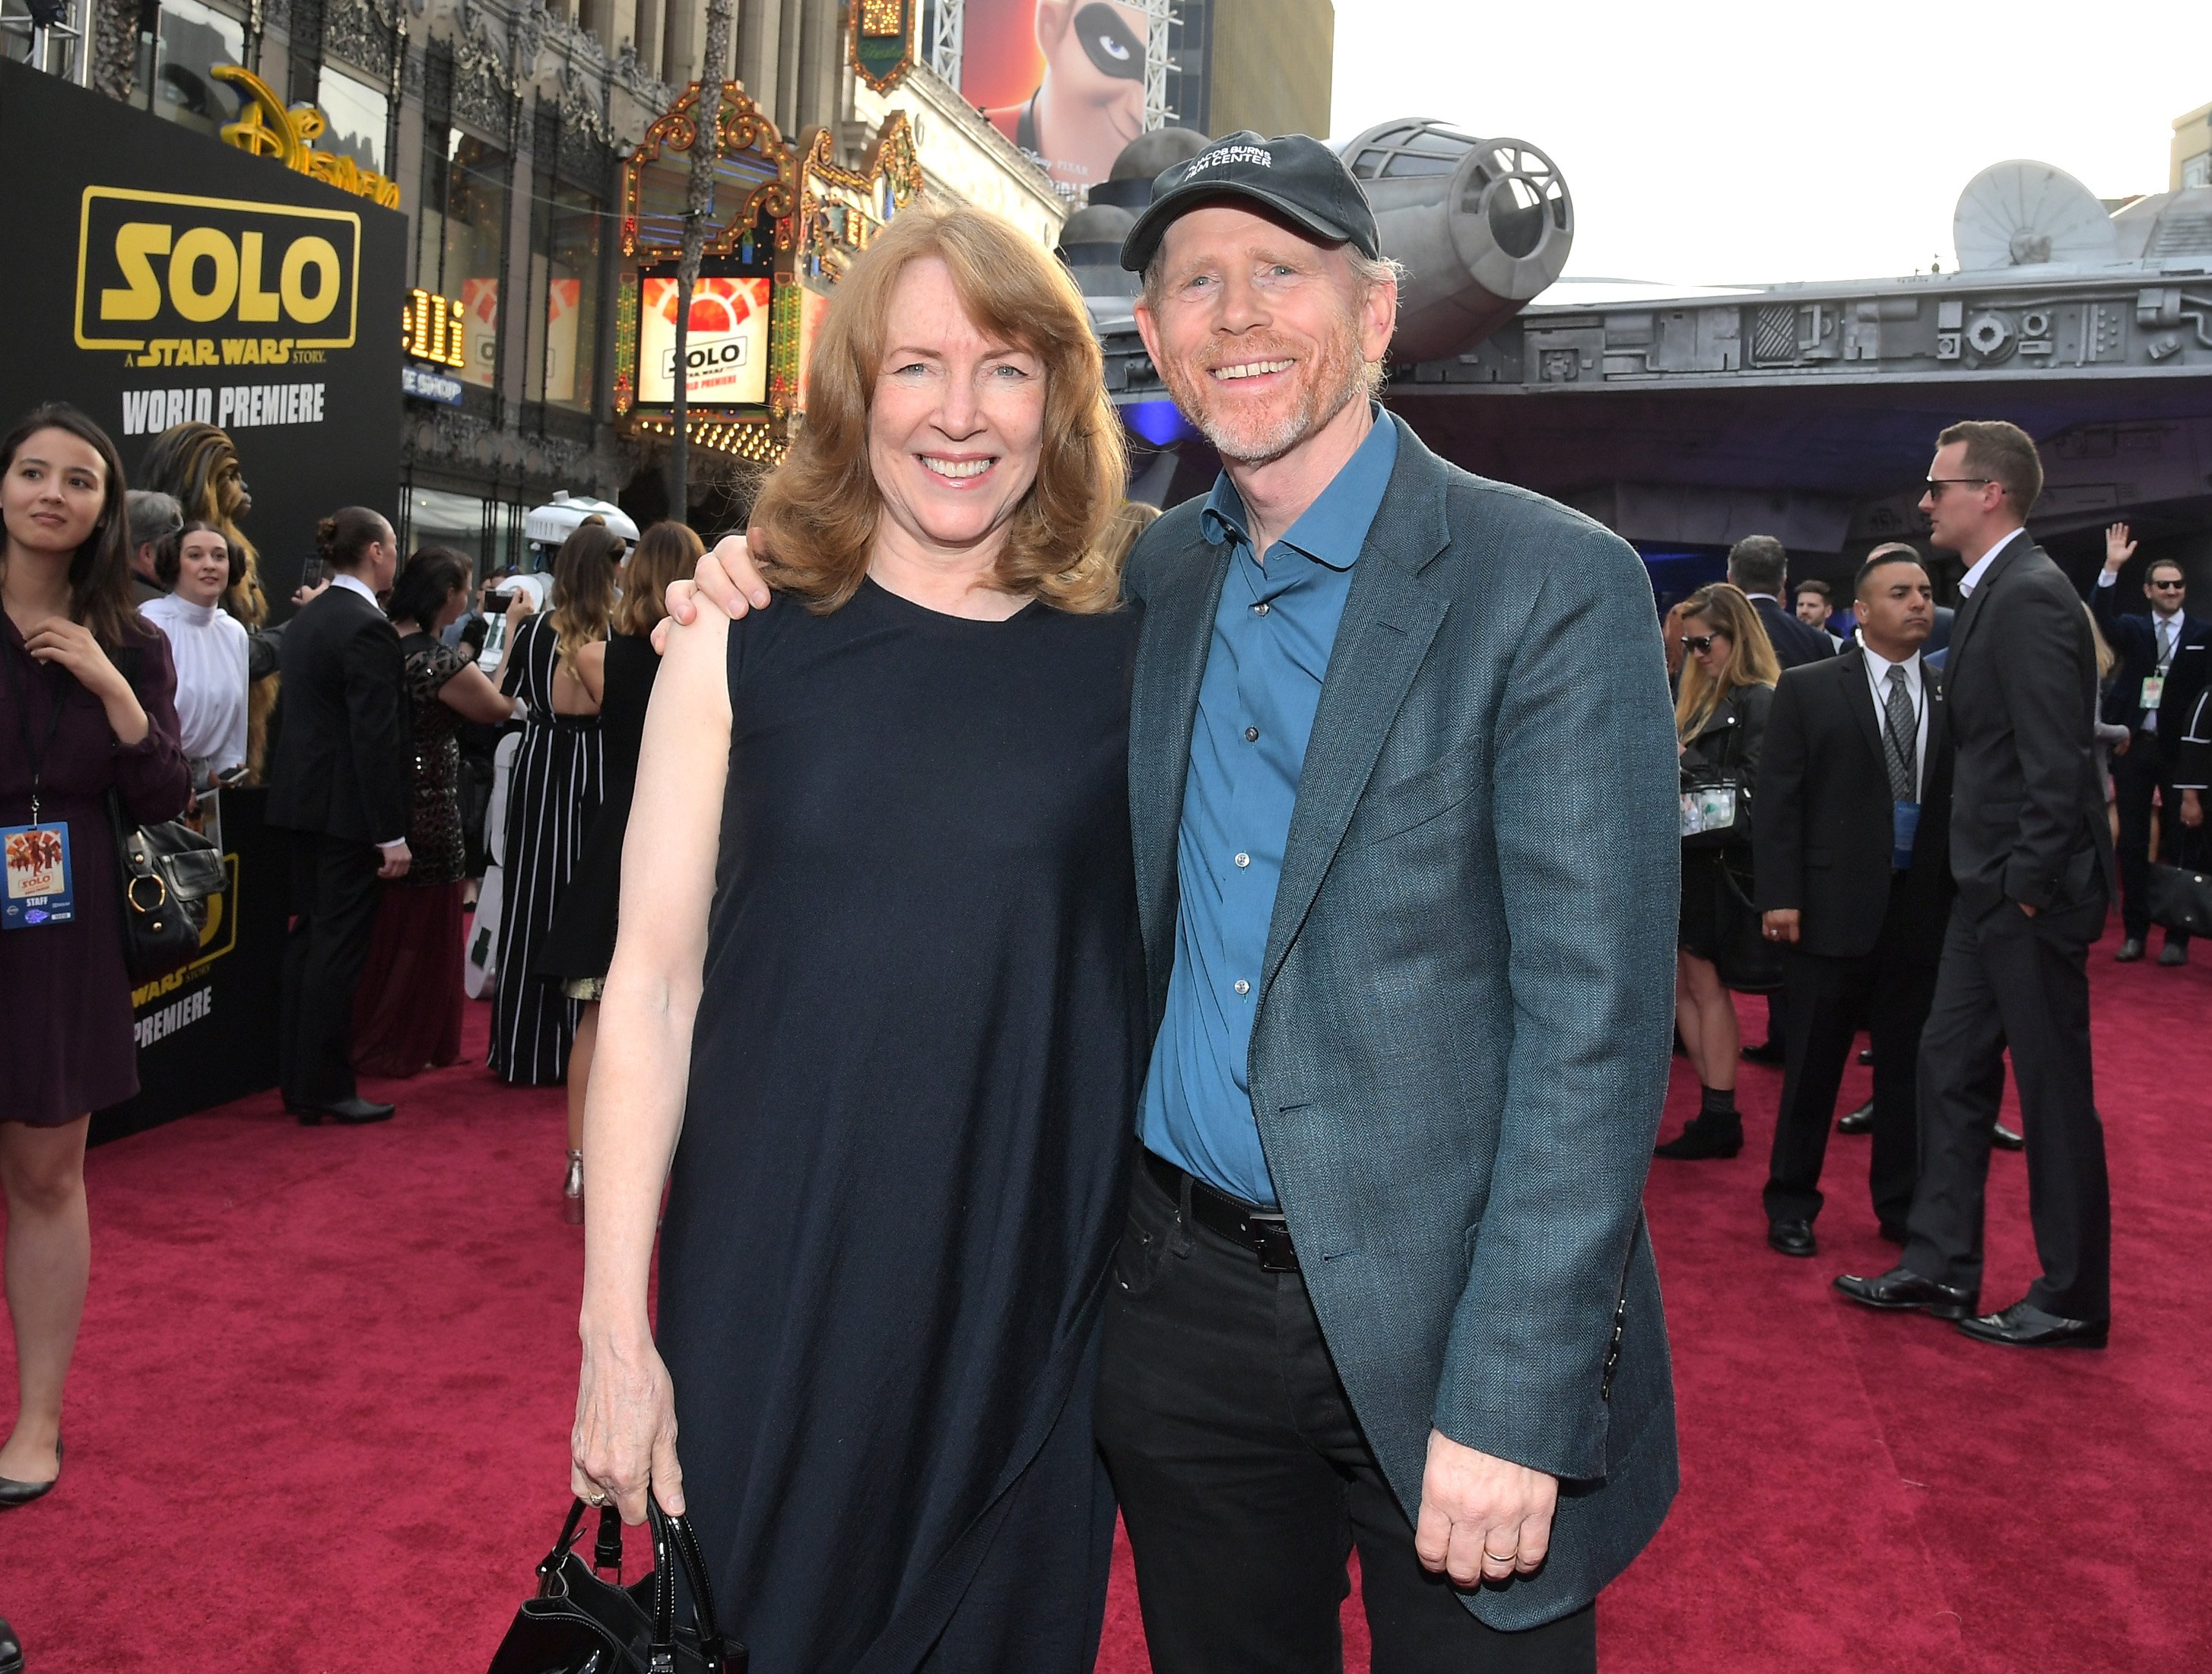 Director Ron Howard Was Quarantined From His Wife Before Their Anniversary